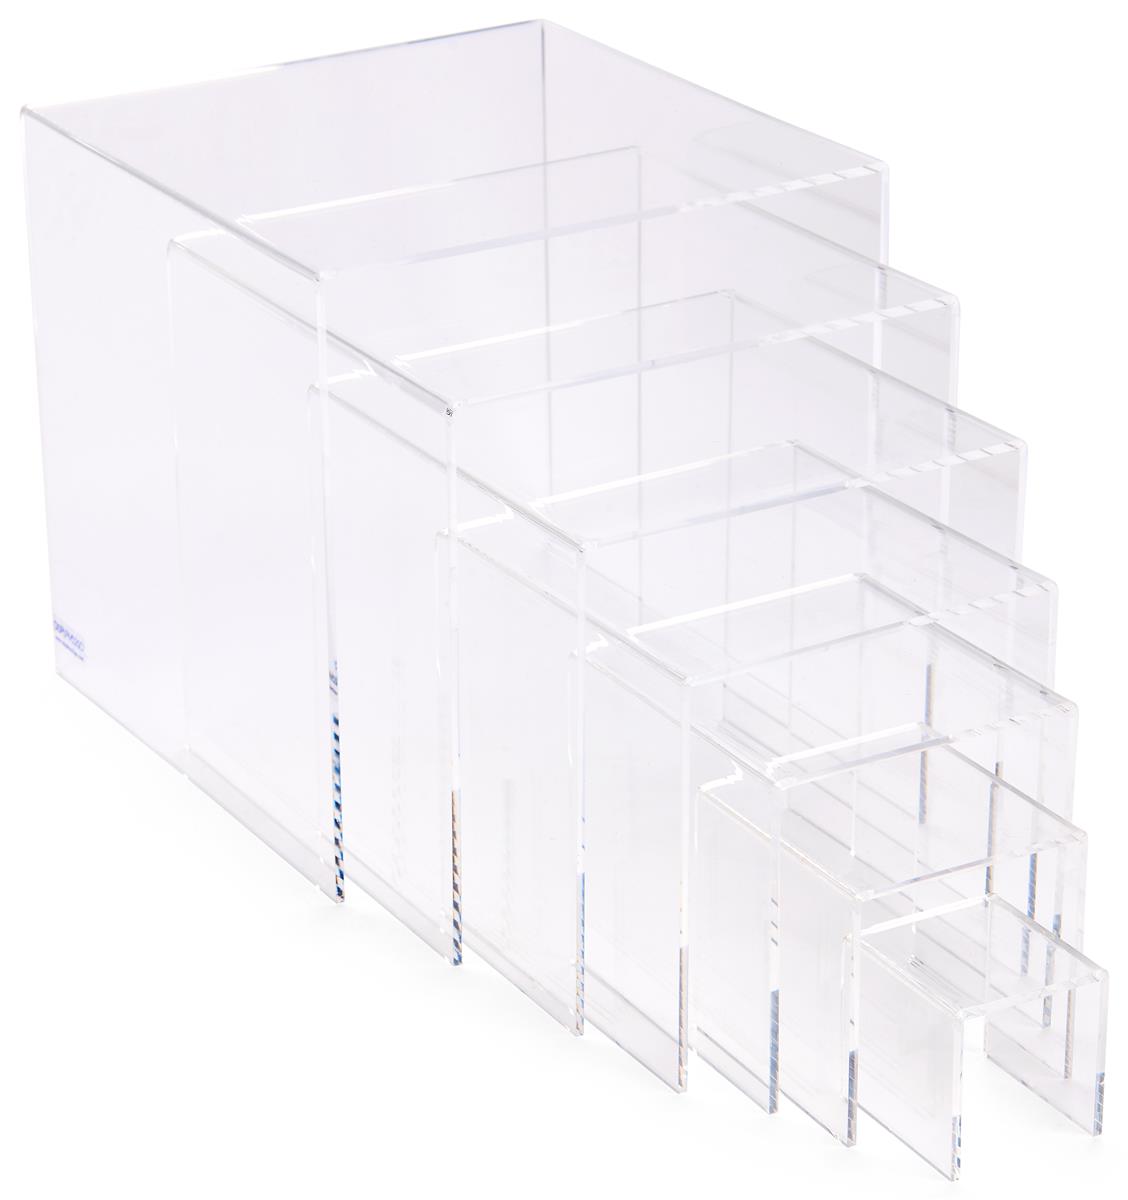 Acrylic Display Risers with 7 Different Sizes